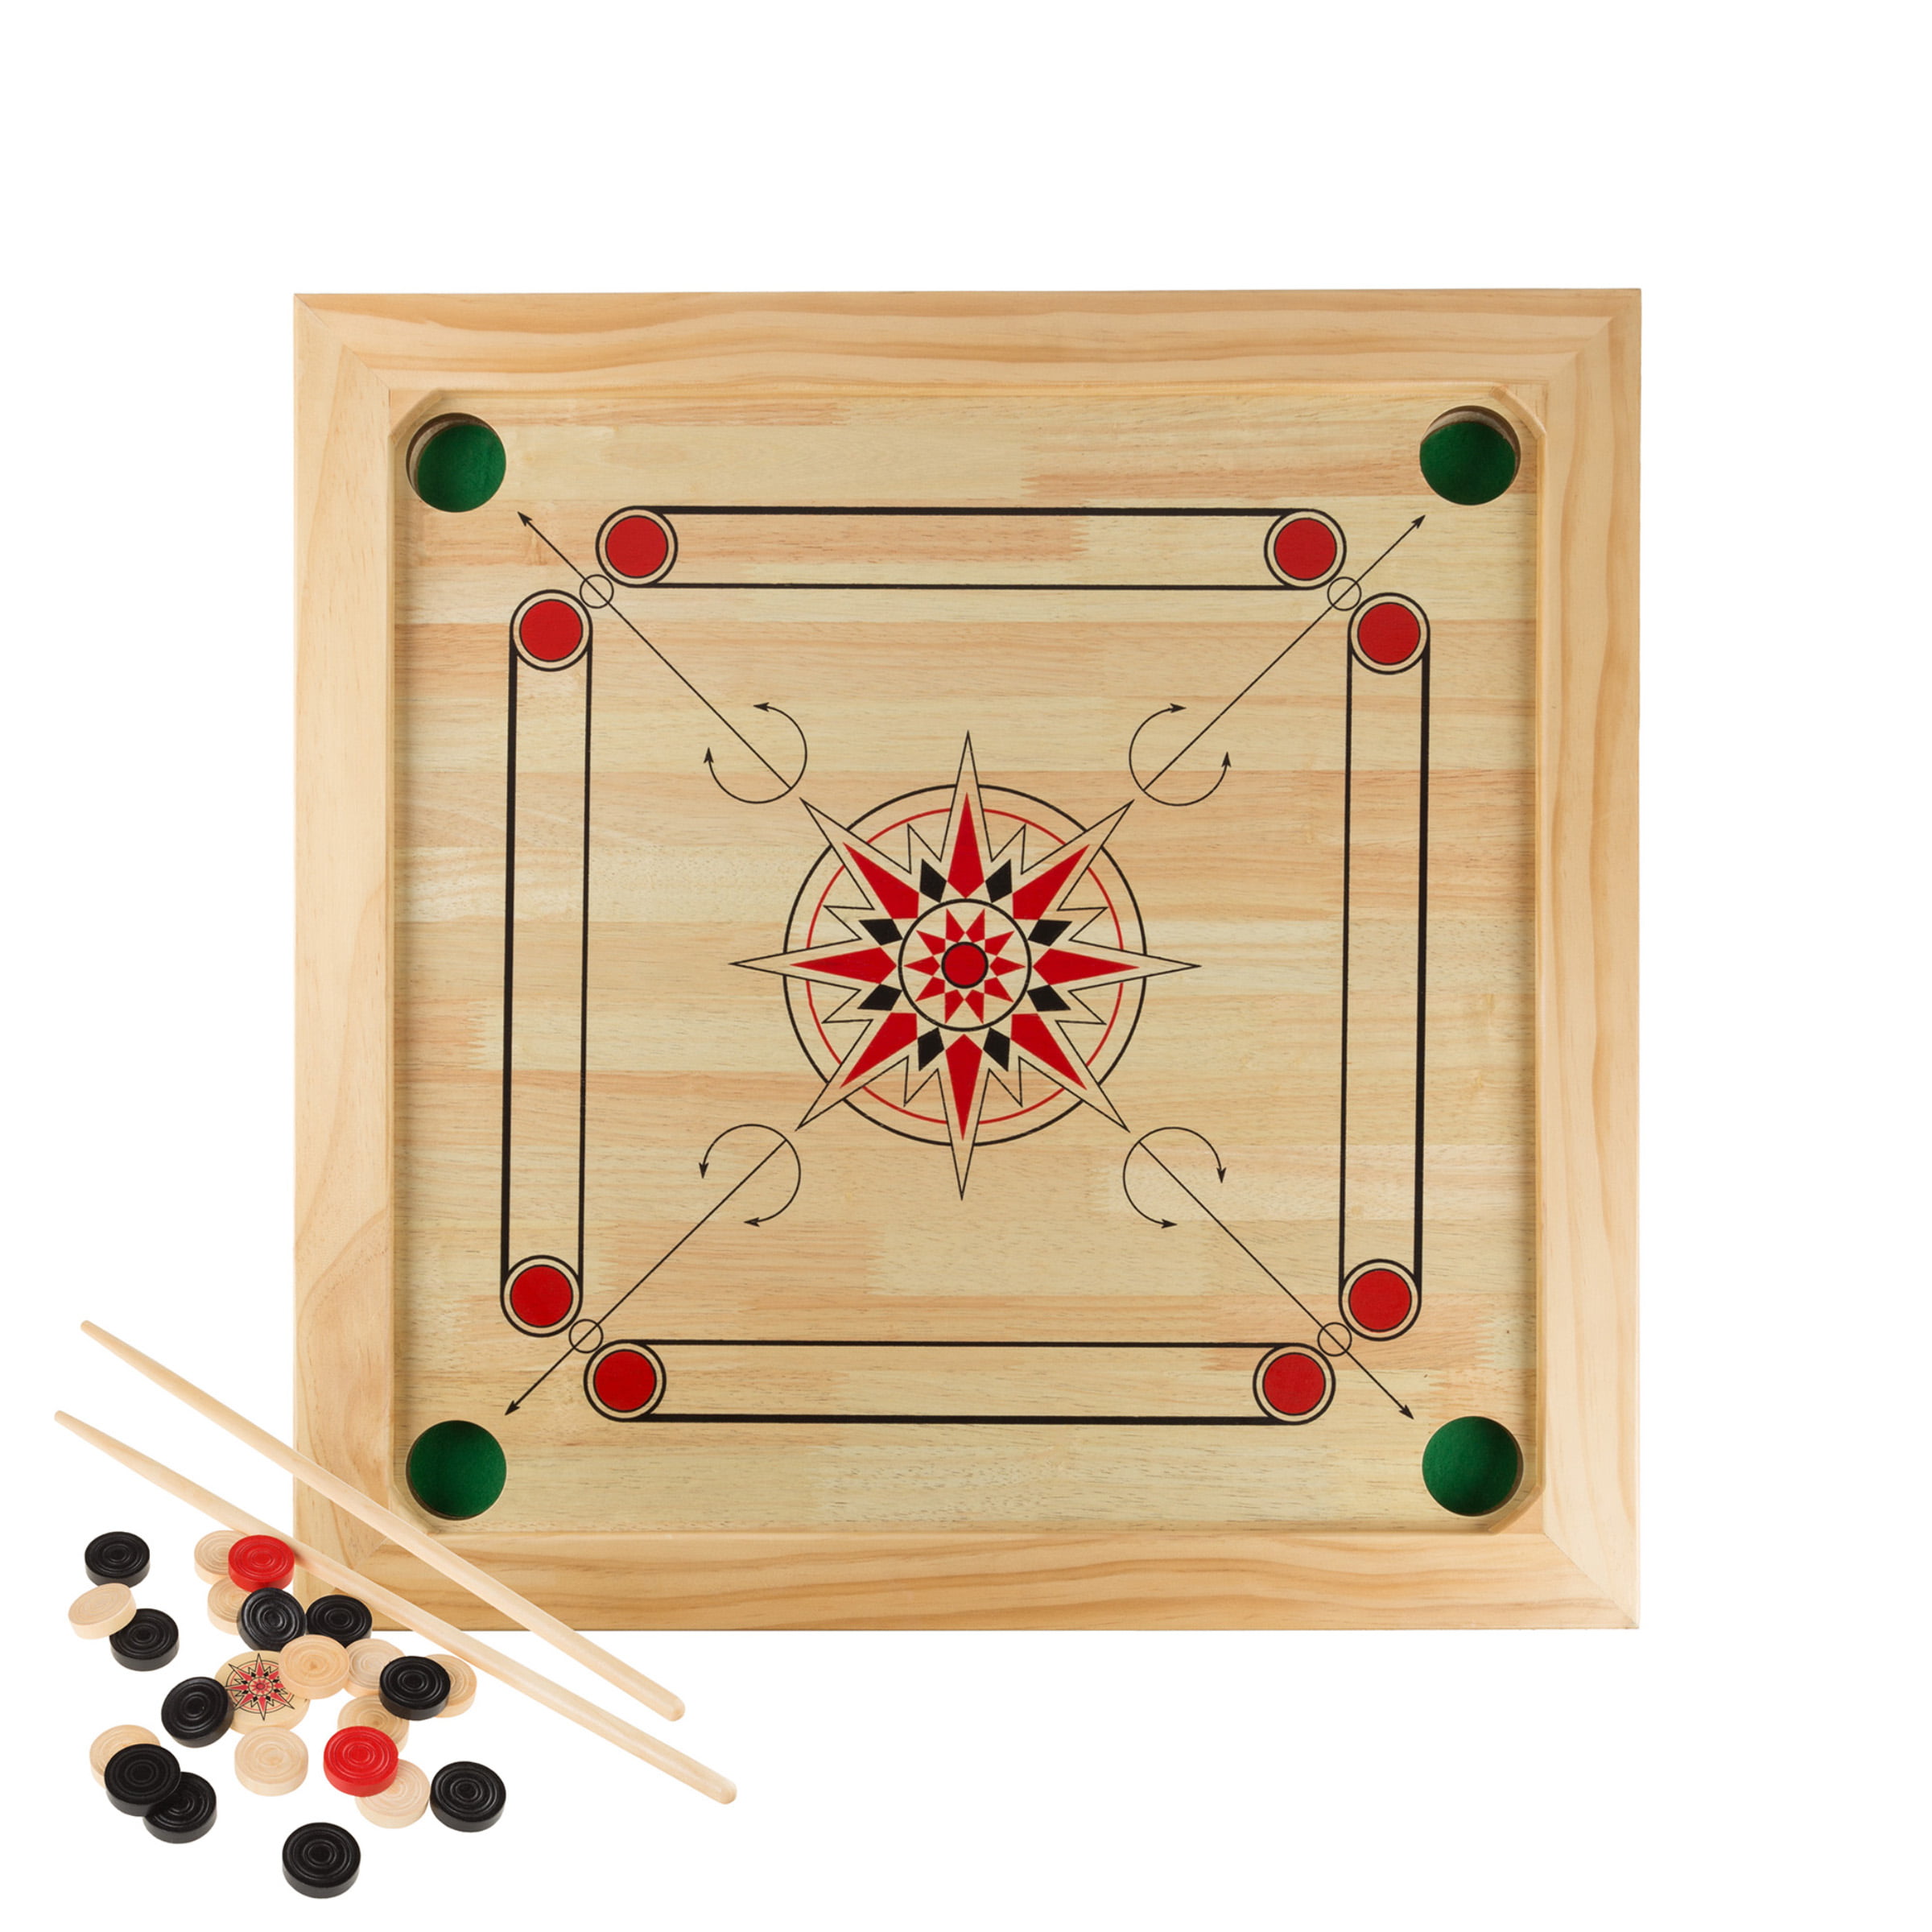 Ships from USA Brand New Full Size Carrom Board 32x32 w/ coins & 2 strikers 